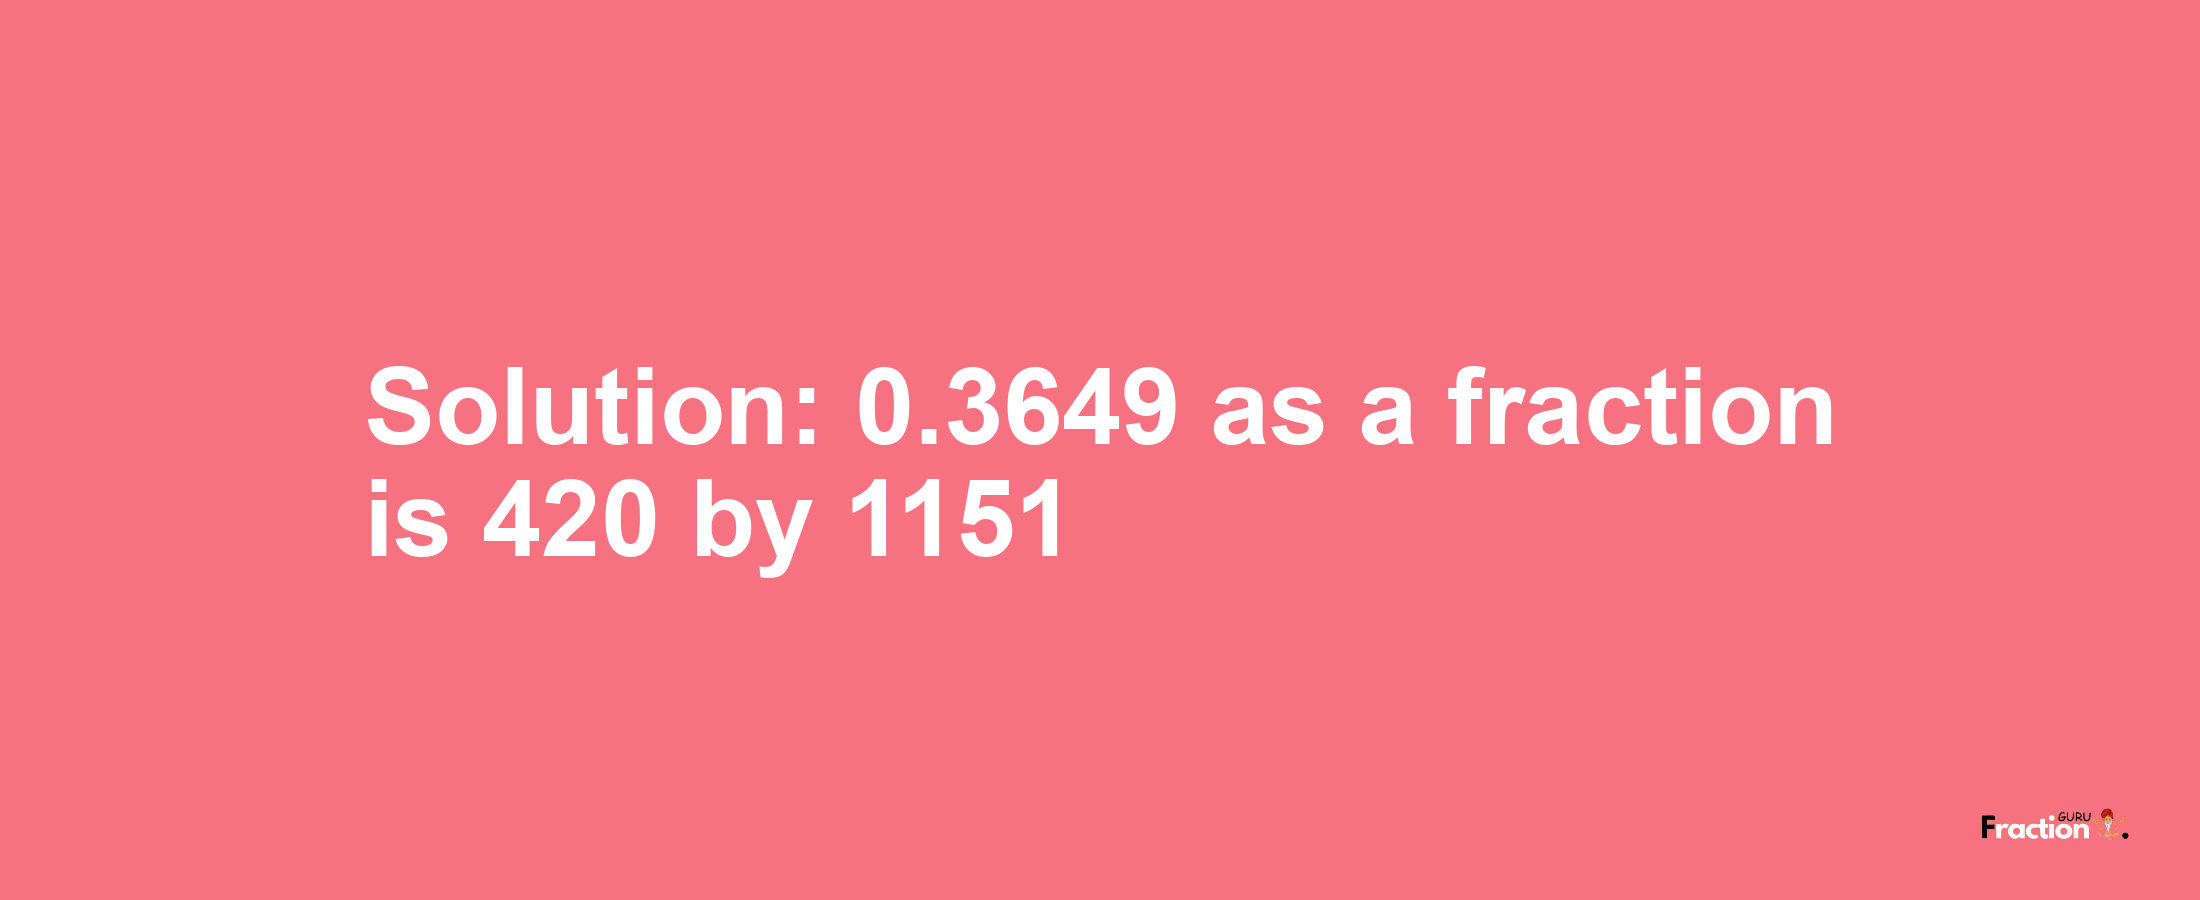 Solution:0.3649 as a fraction is 420/1151